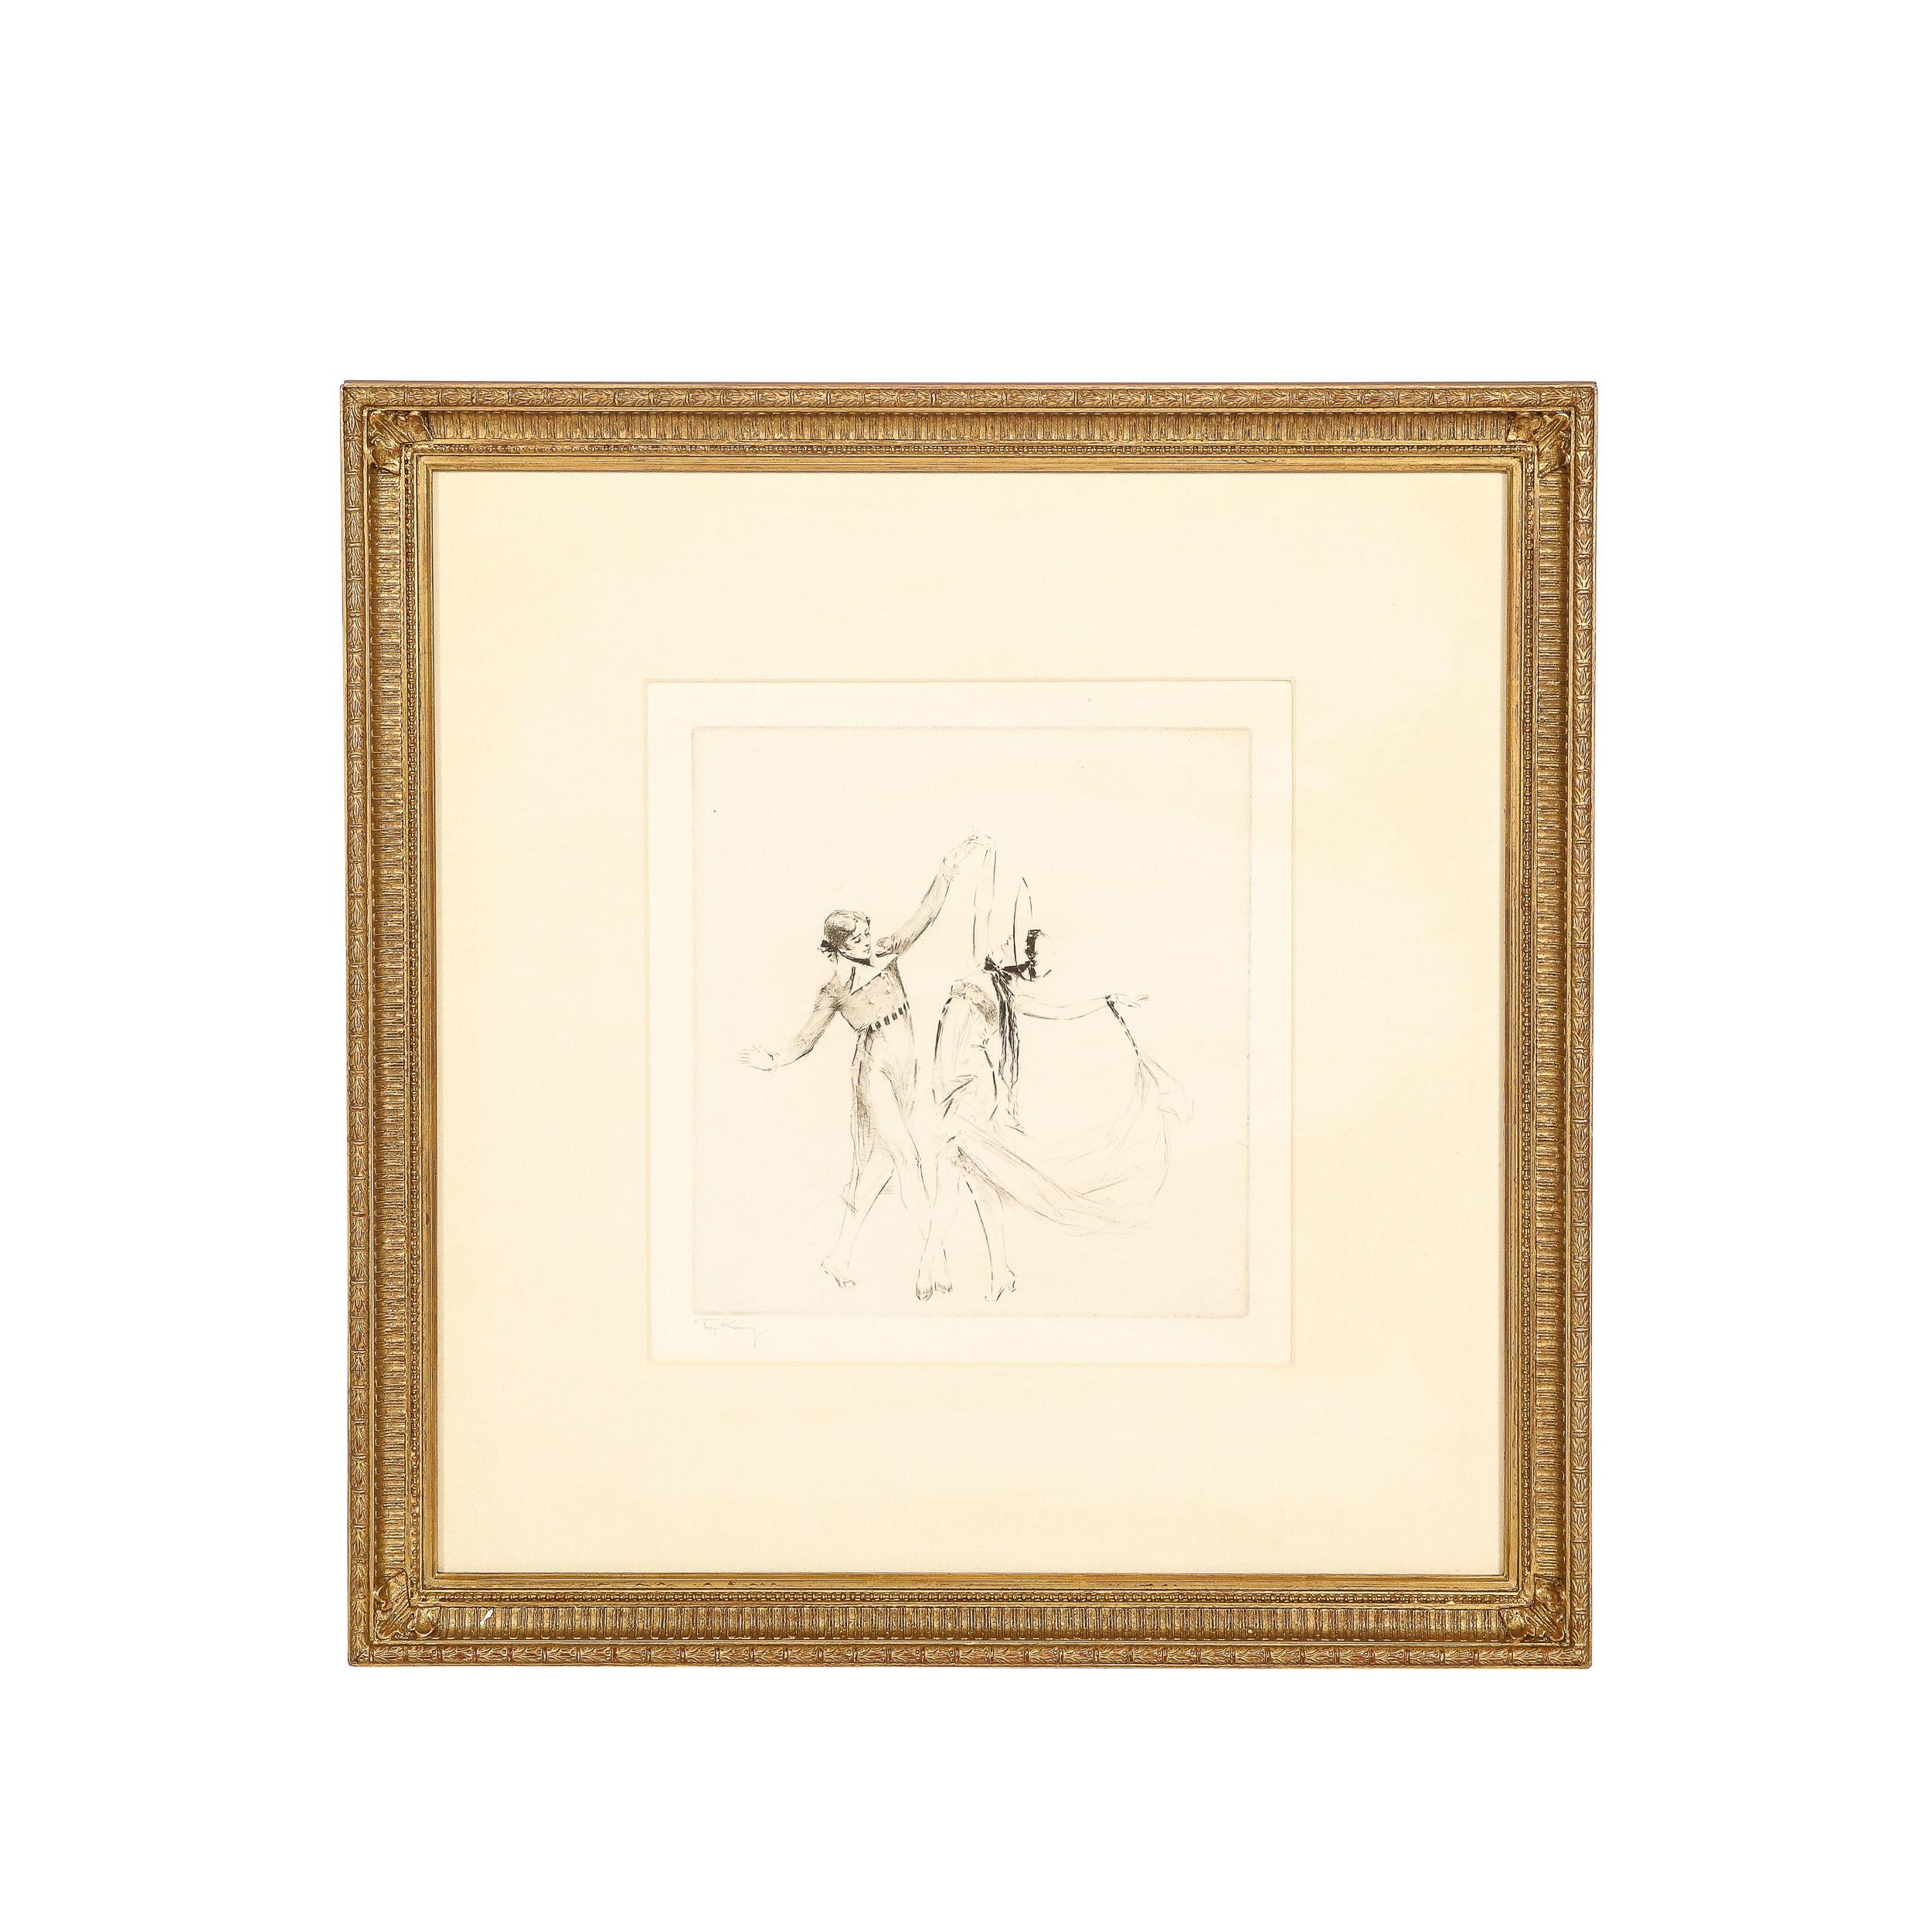 This beautiful dry point/ etching, entitled "Gavotte Pavlowa", was realized by the esteemed American artist Troy Kinney circa 1922. The Gavotte Pavlova was introduced to an American audience around 1915 by ballet star Anna Pavlova (1881-1931 born